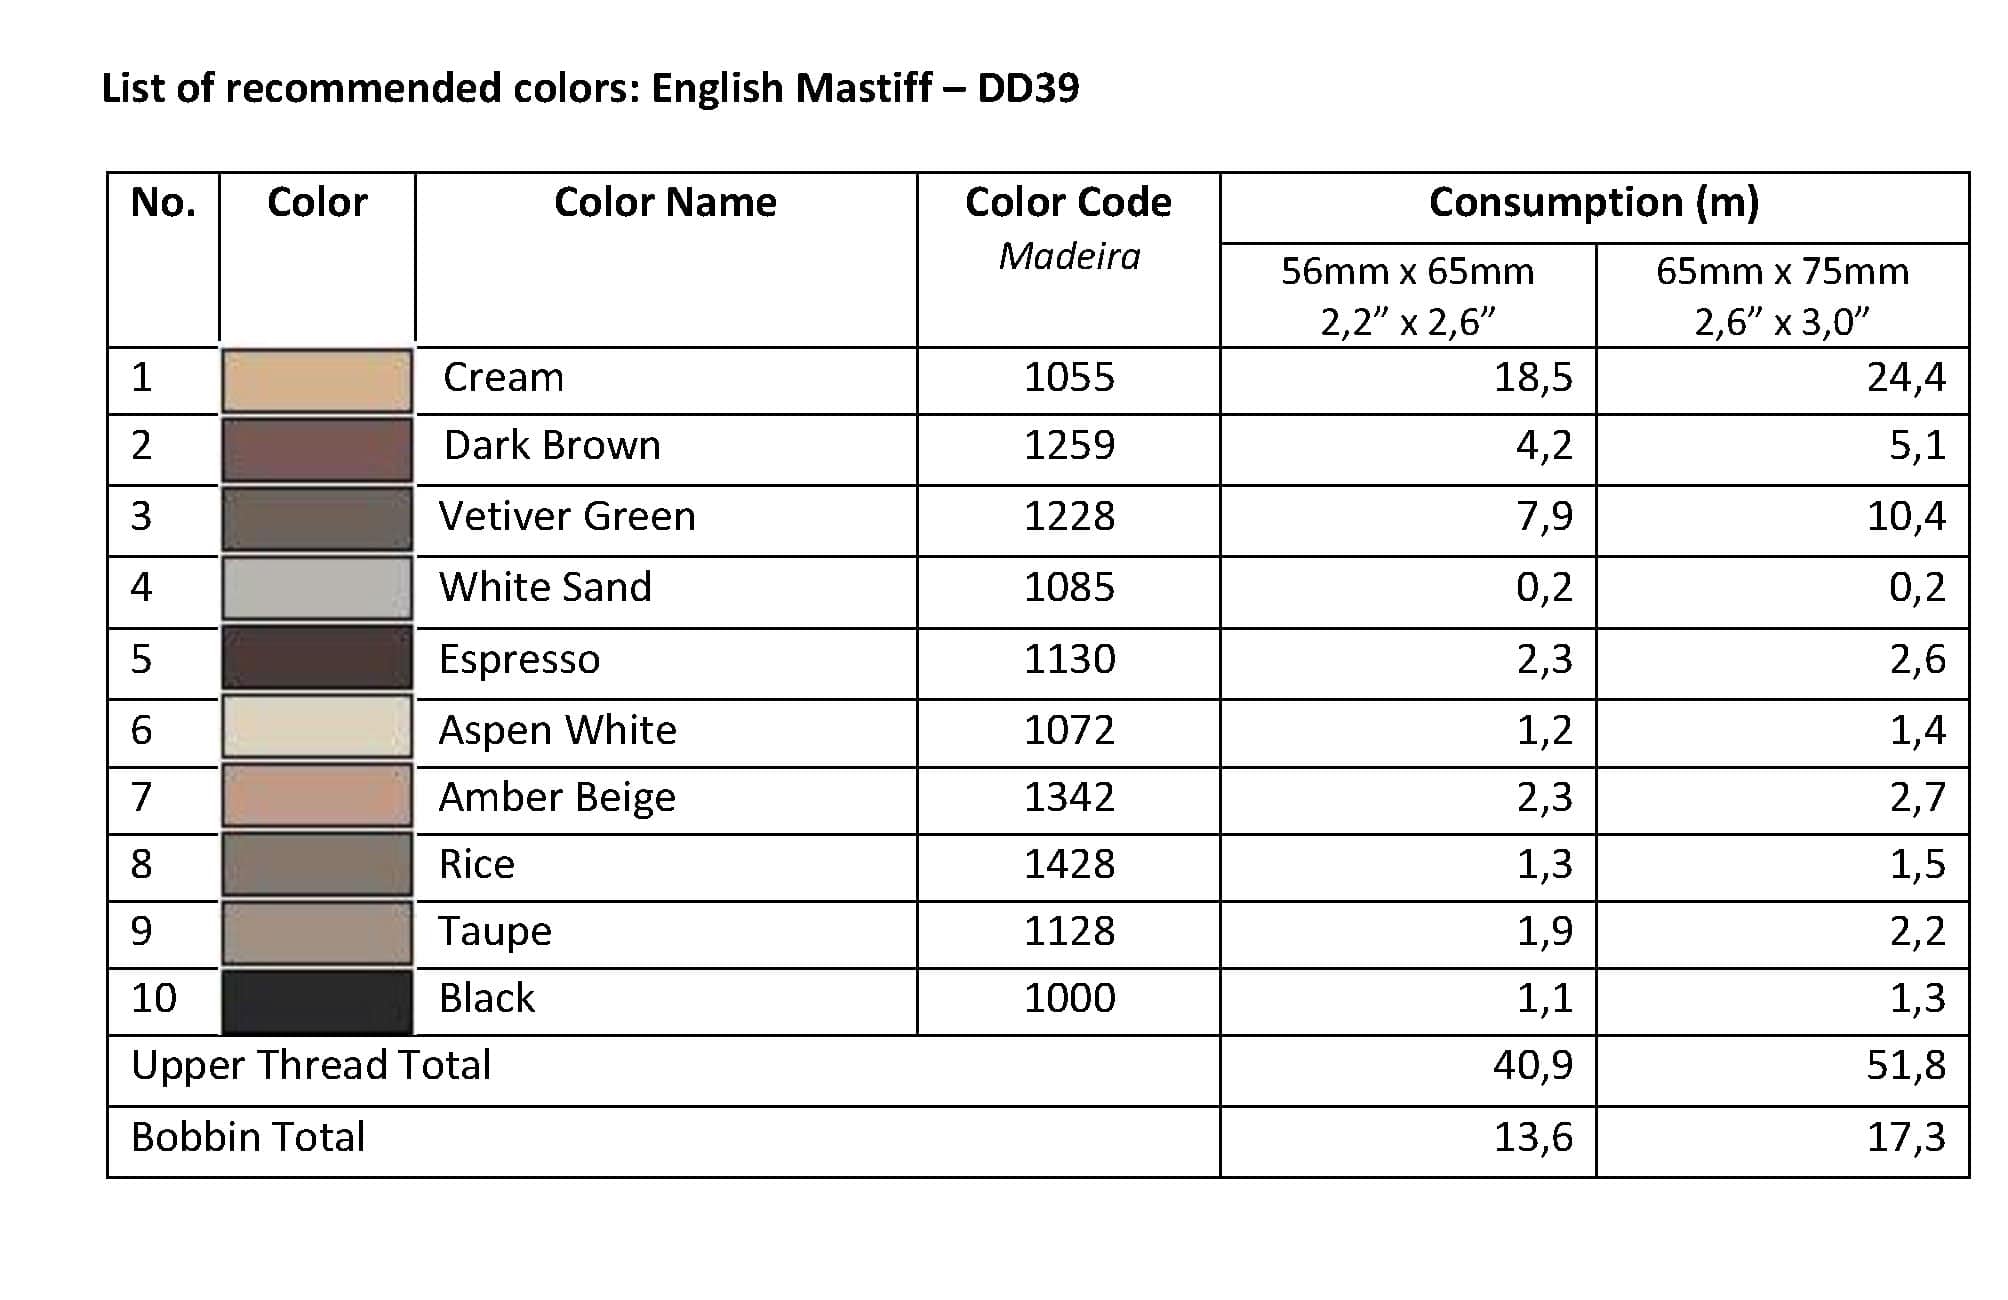 List of Recommended Colors - English Mastiffl DD39